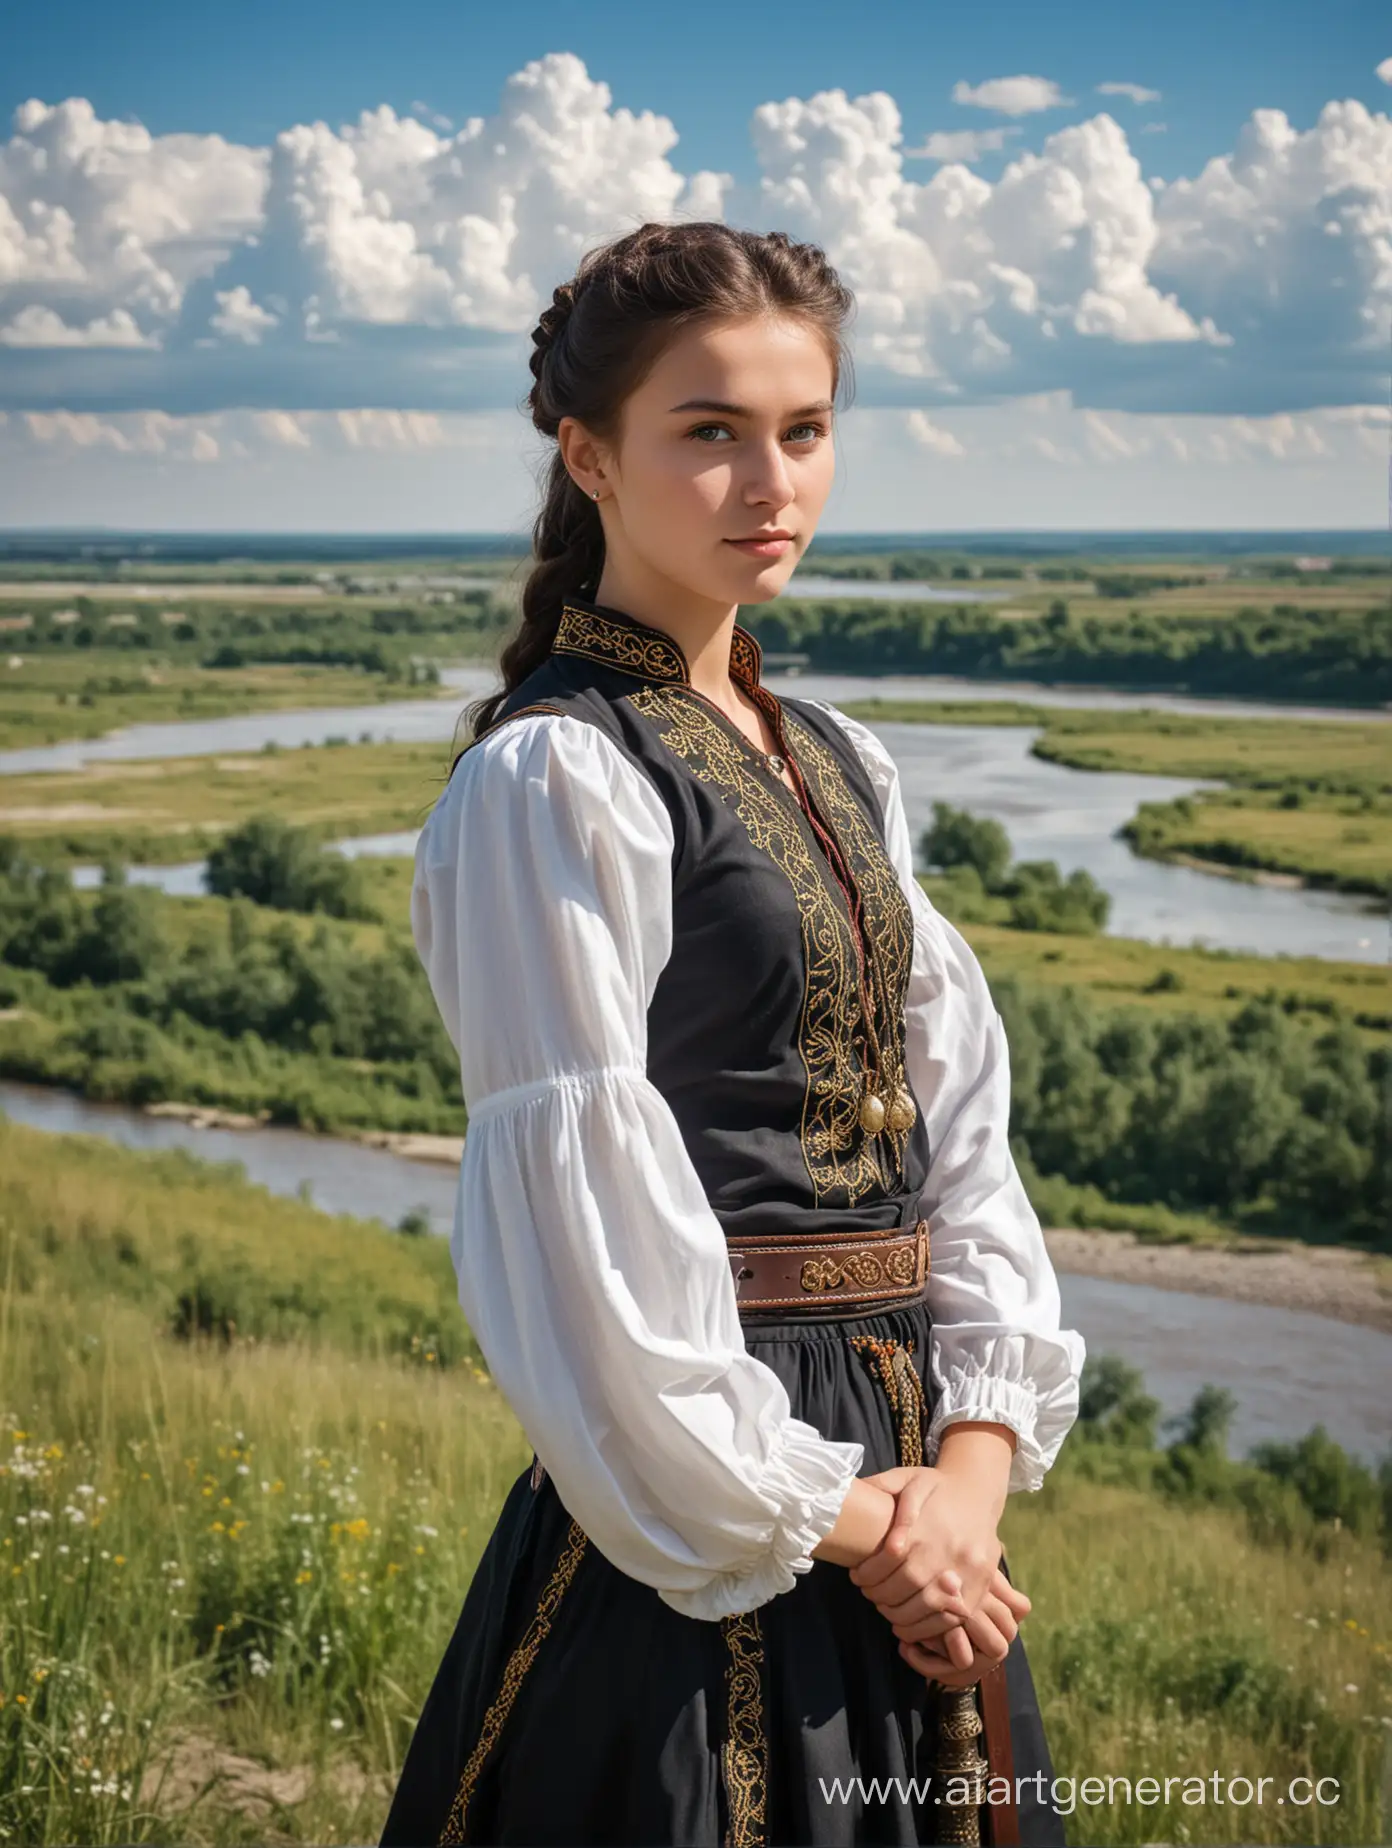 Youthful-Cossack-Girl-Embracing-Nature-at-a-Kuren-with-River-and-Clouds